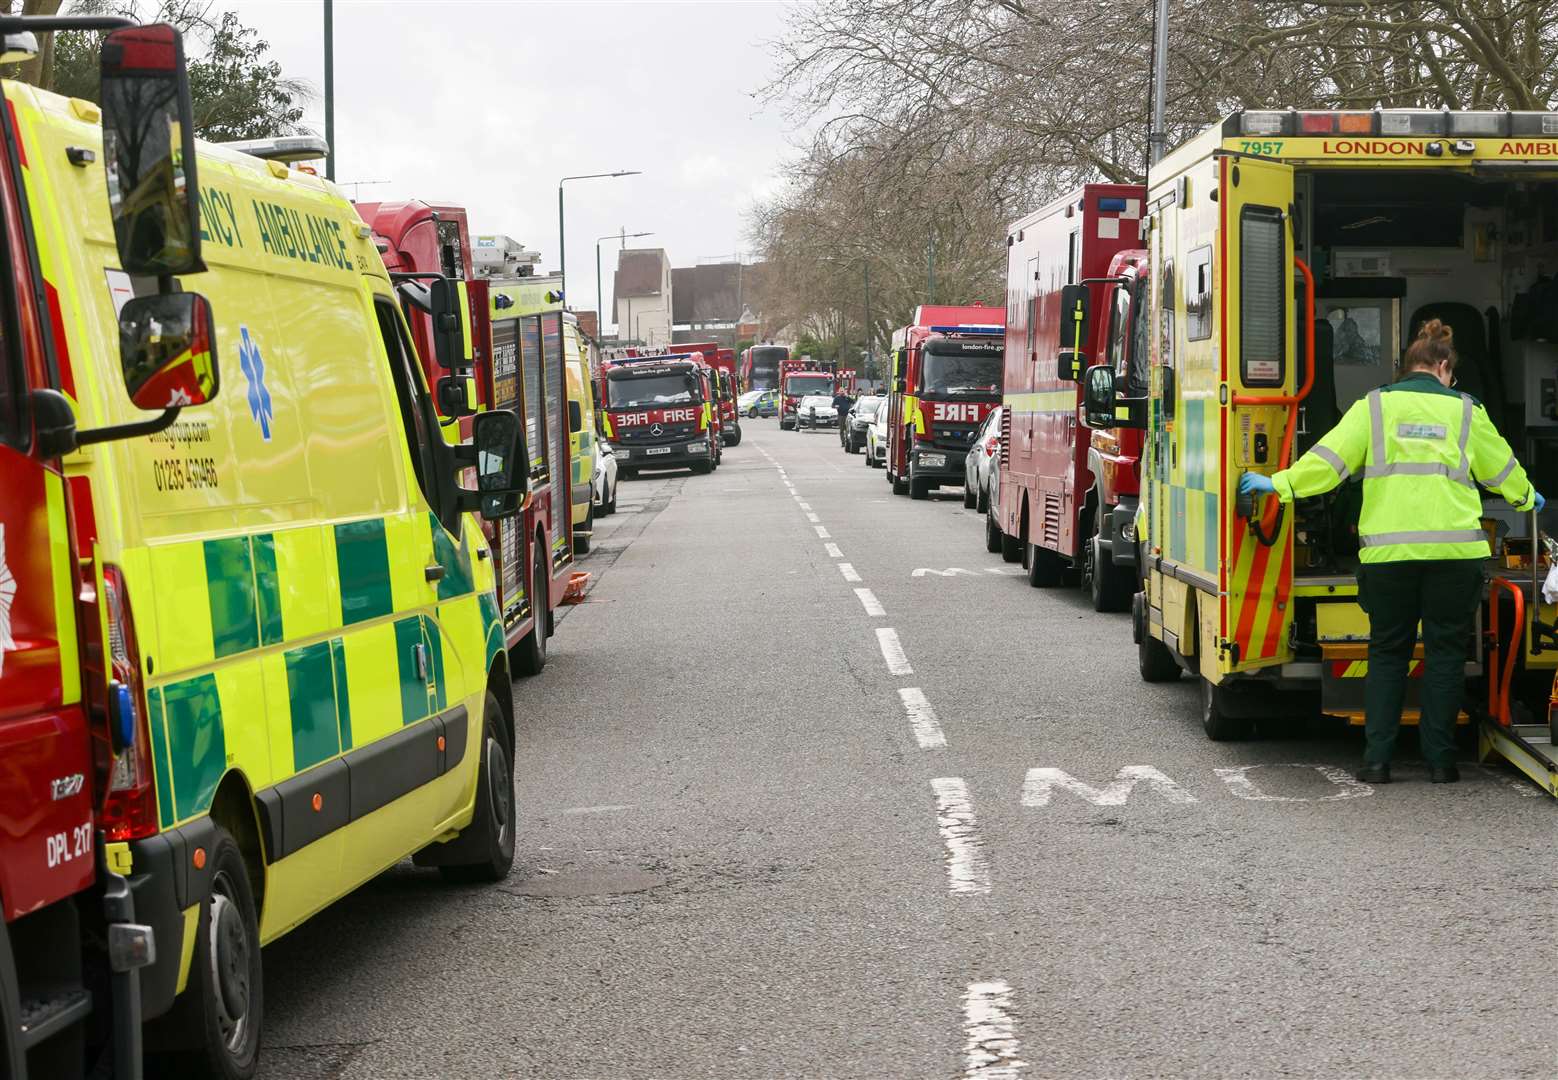 Woolwich Road in Bexleyheath was full of emergency service vehicles. Picture: UKNIP